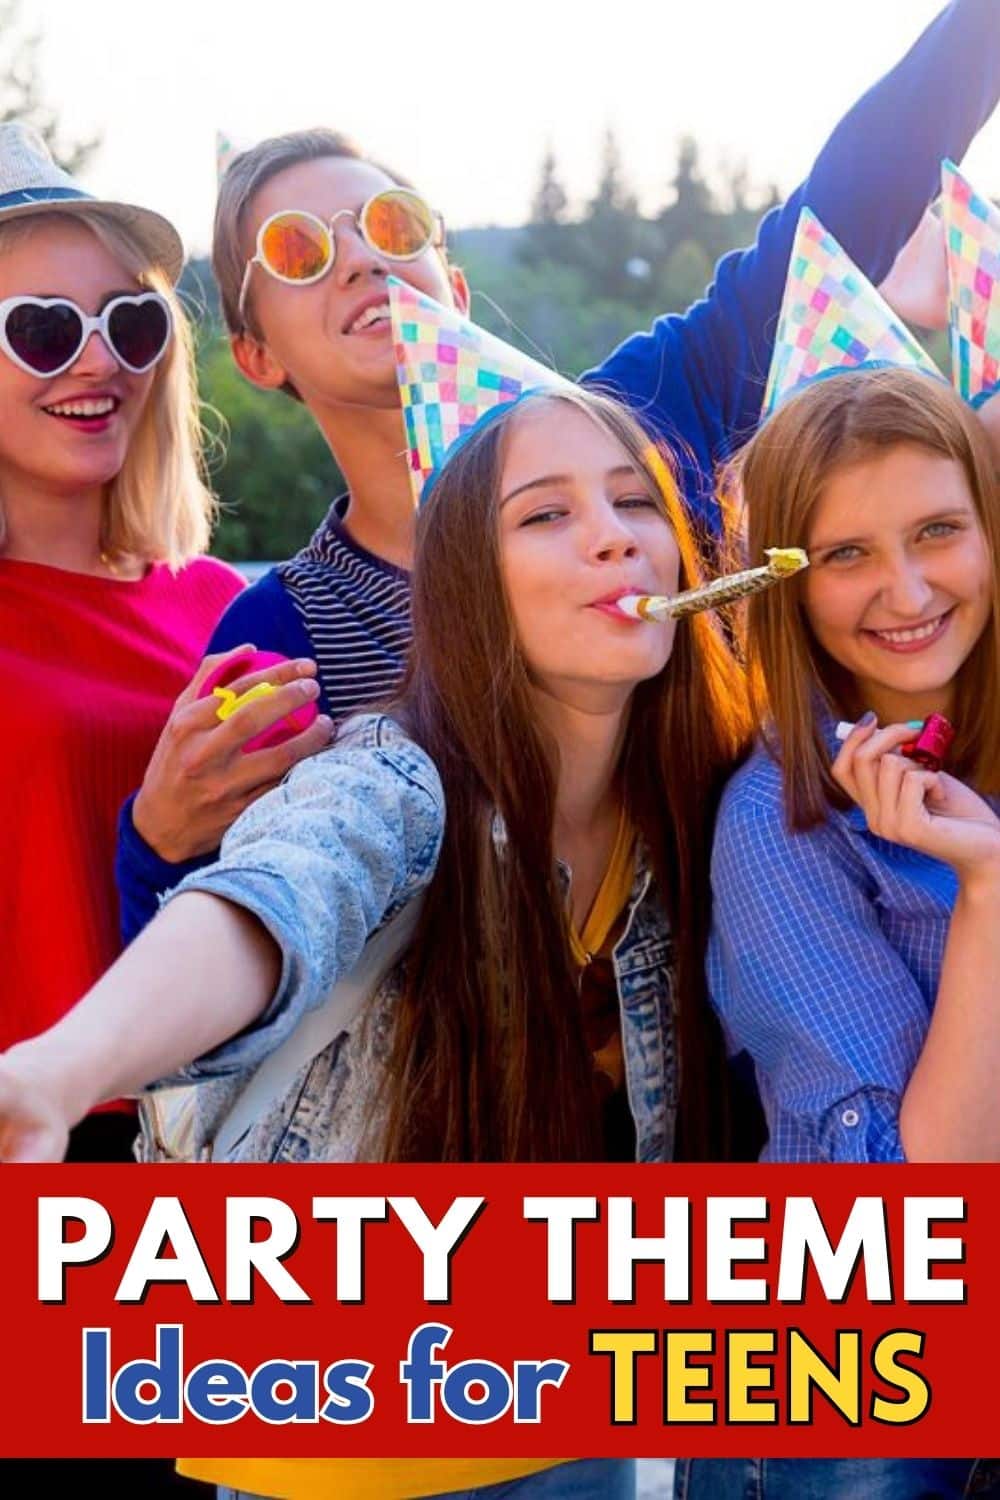 Looking for party theme ideas for teens? Look no further! We have a variety of exciting and unique themes that will make your teen's party a hit. From beach bonanzas to movie nights,